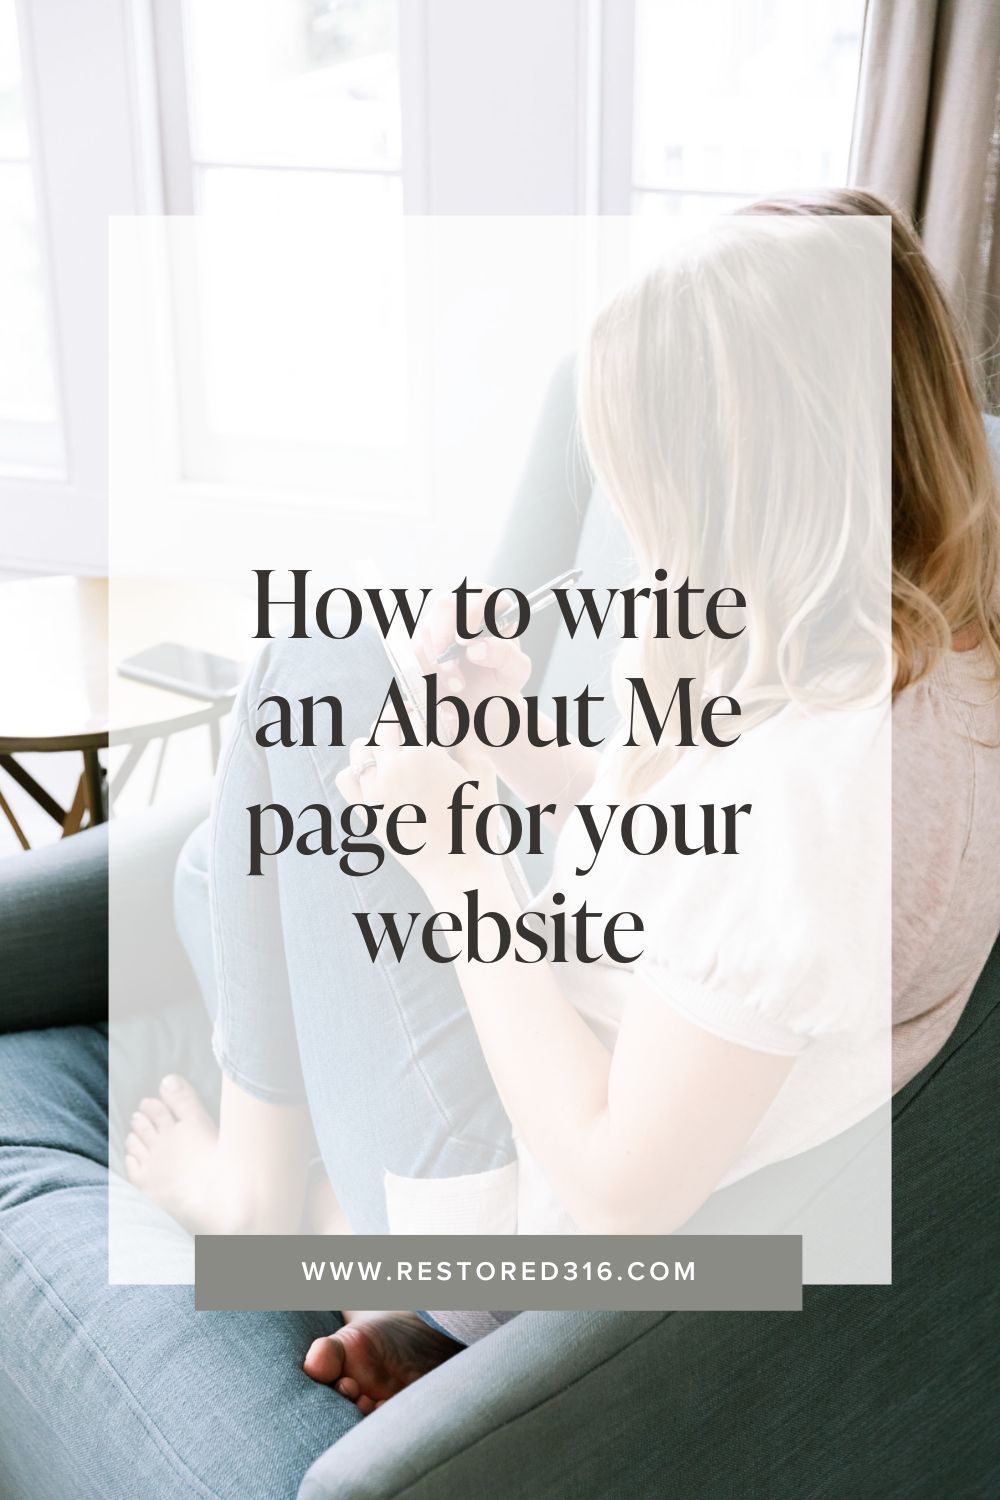 How to write an About Me page for your website